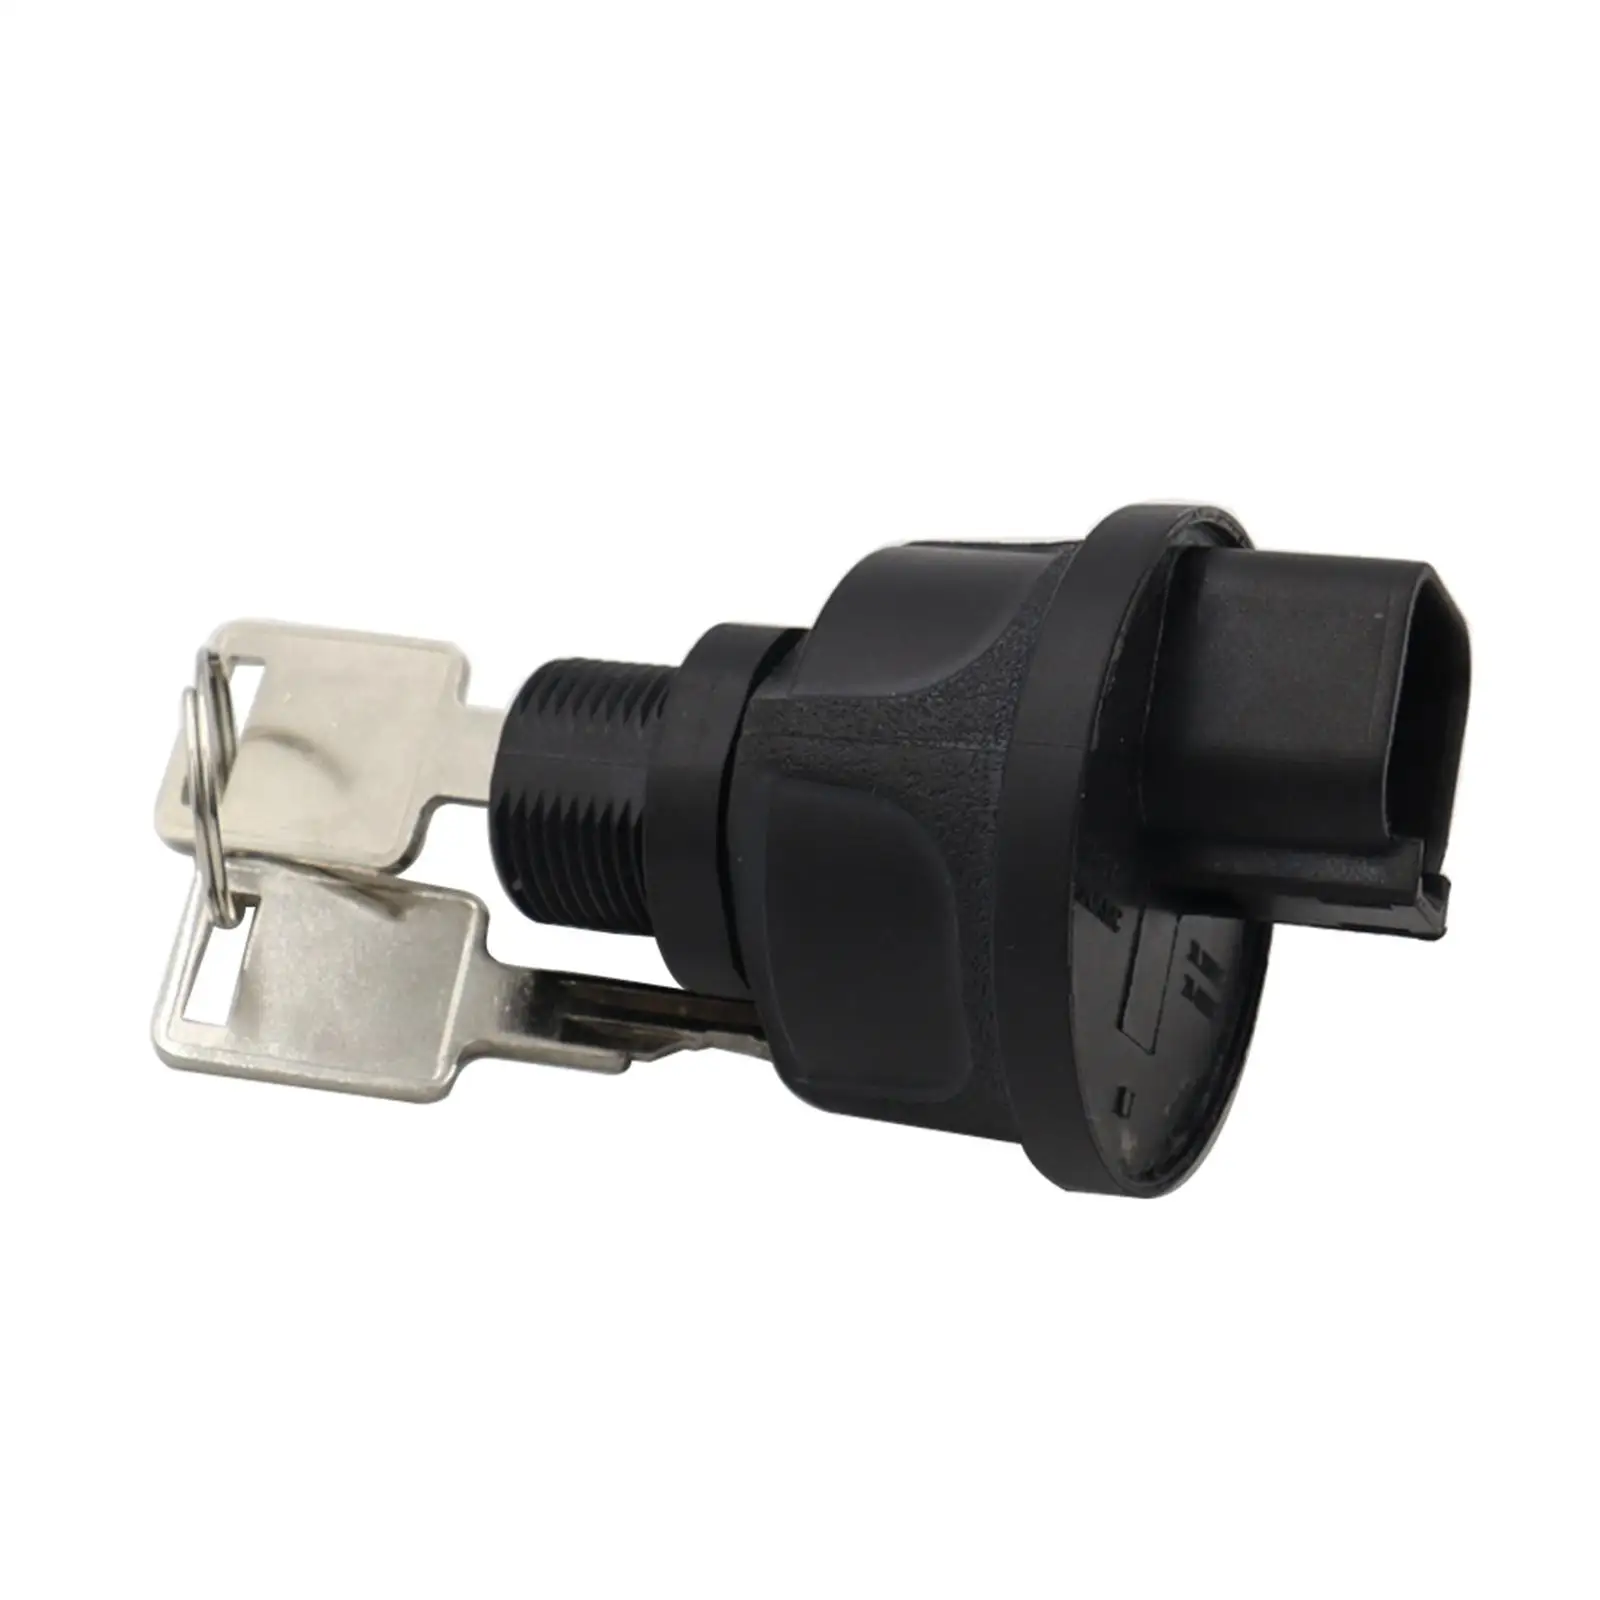 Ignition Key Switch Repalces Durable High Performance for Bobcat Loaders S550 S185